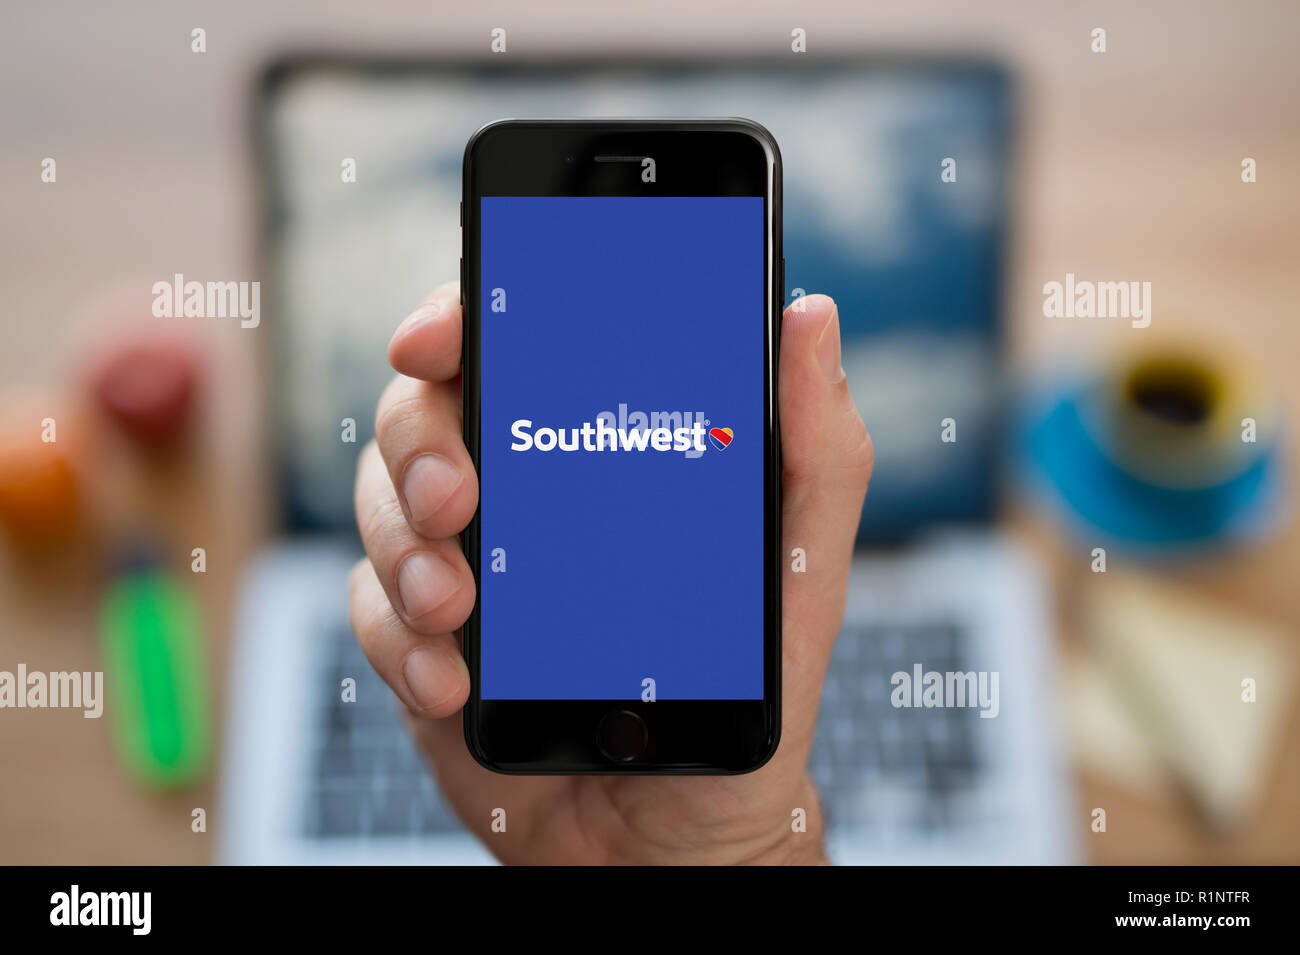 A man looks at his iPhone which displays the Southwest Airlines logo, while sat at his computer desk (Editorial use only). Stock Photo